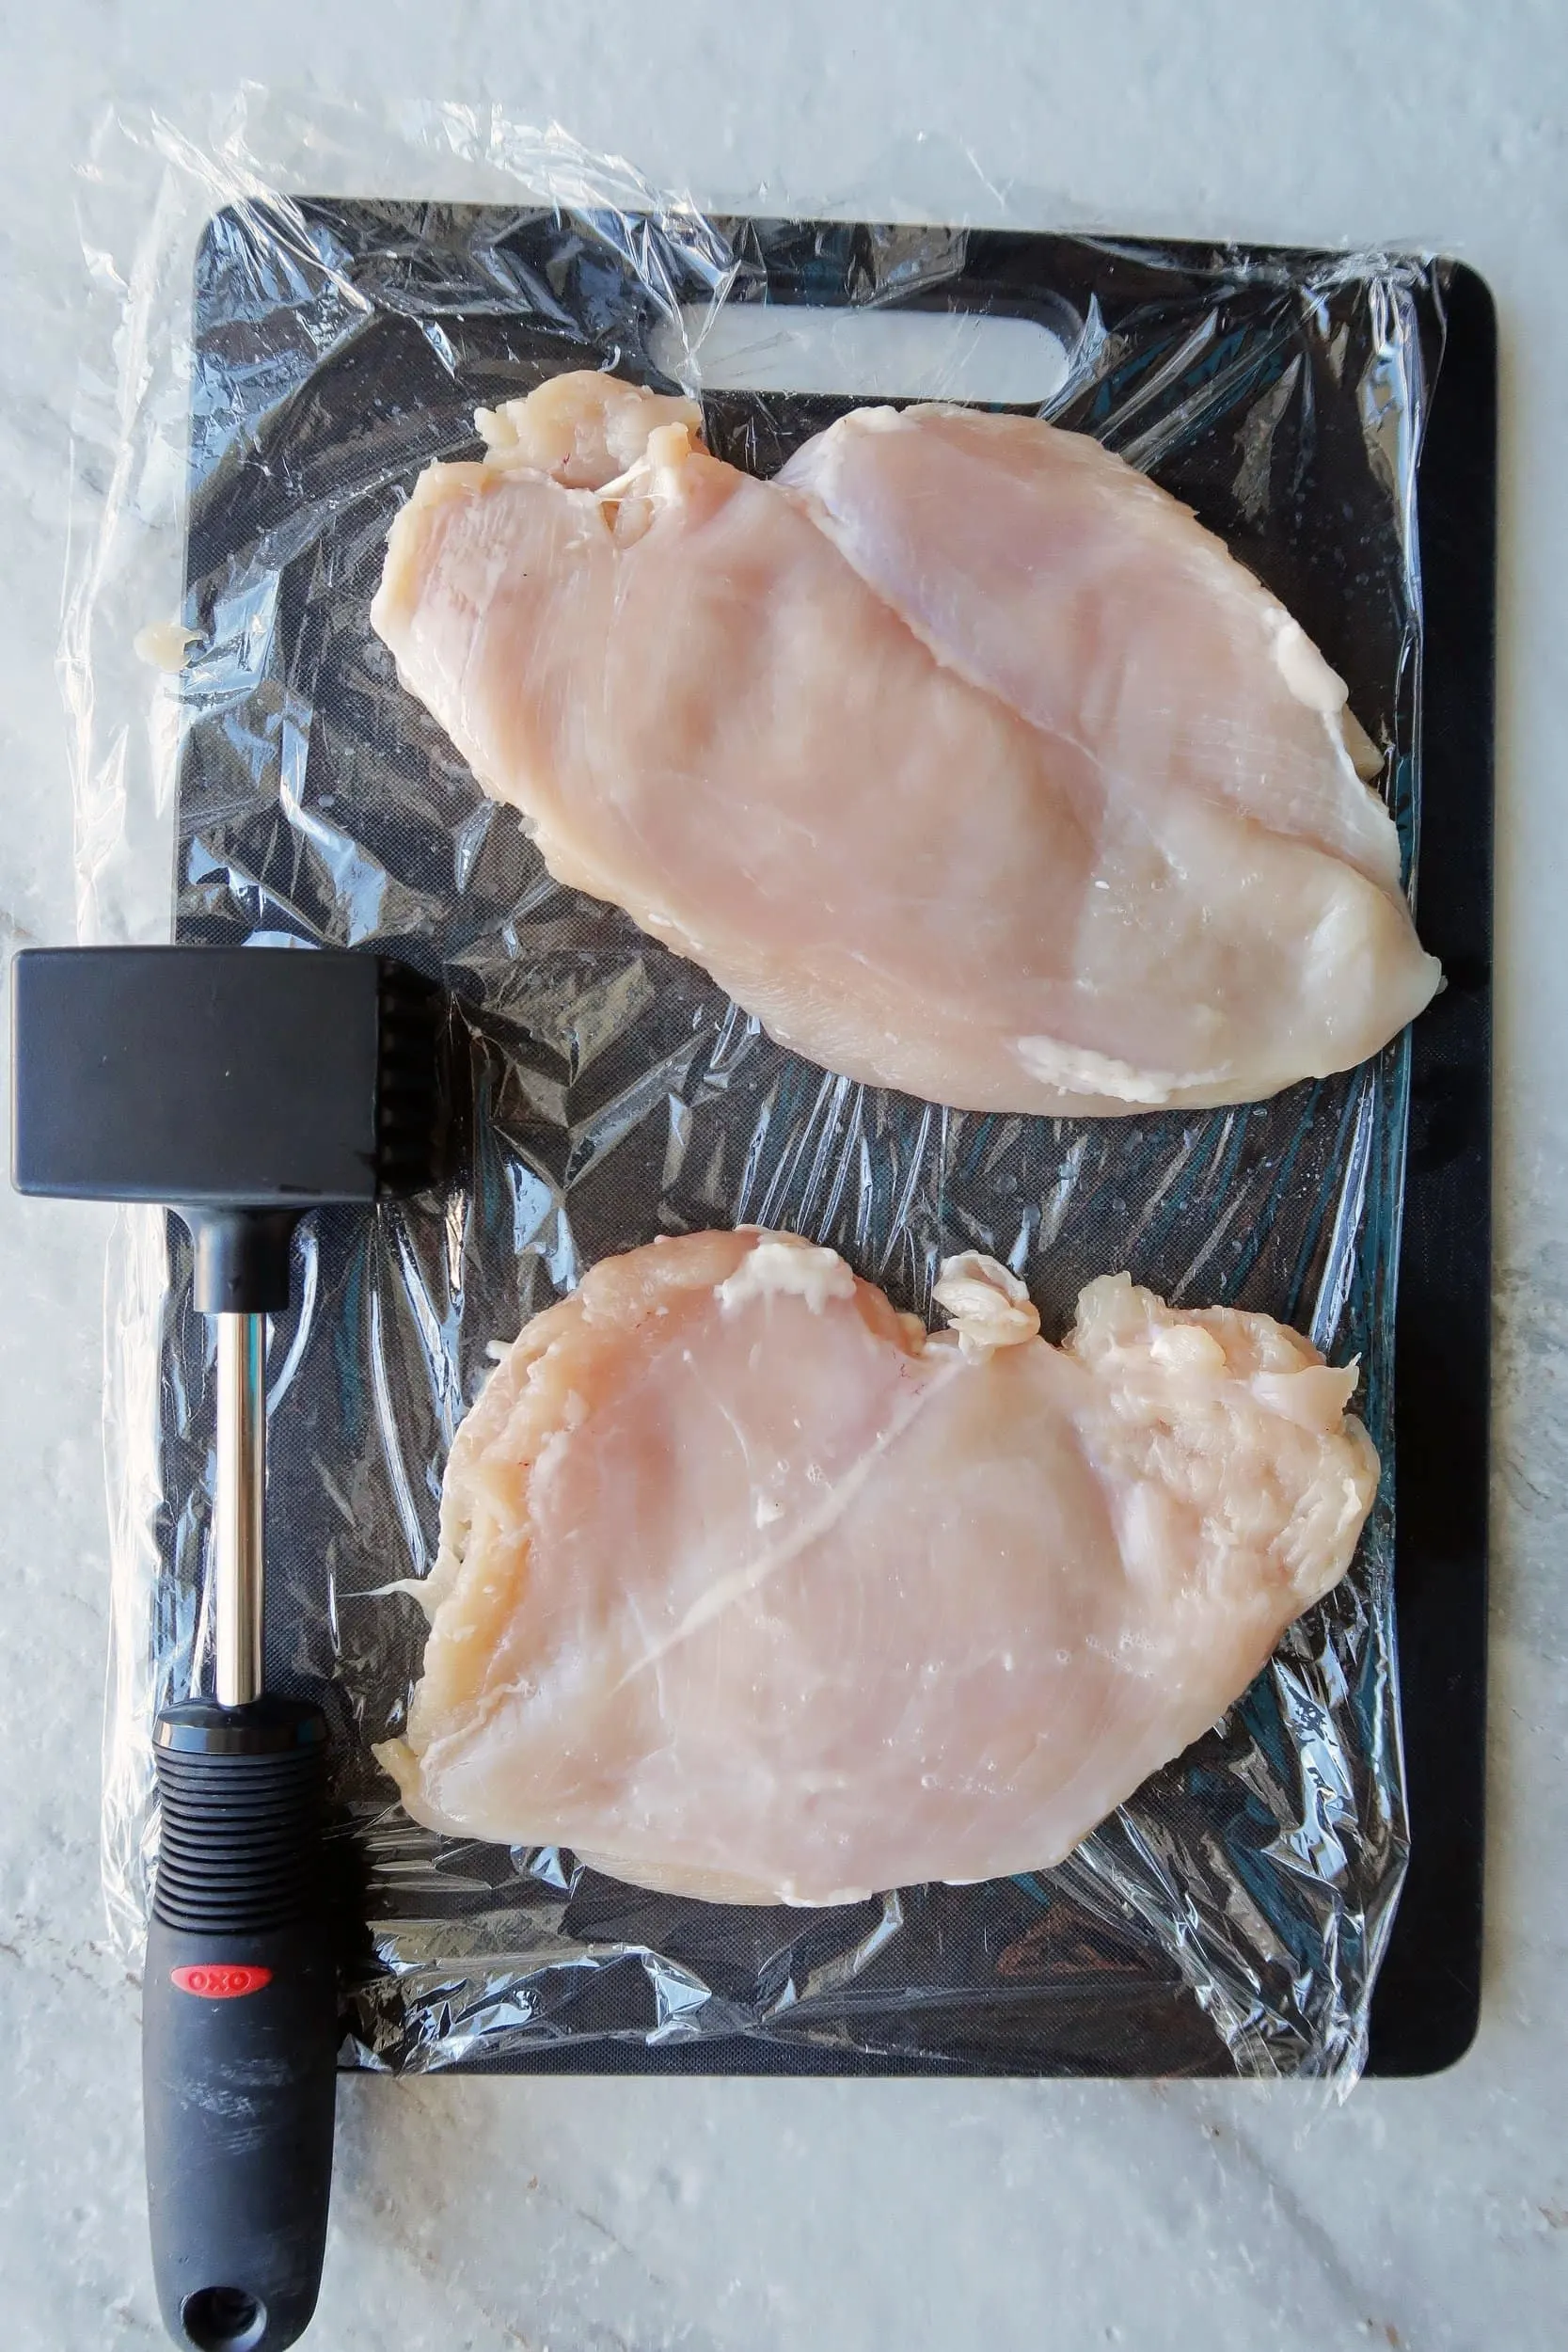 Two large chicken breasts pounded to half-inch thickness on a black cutting board.